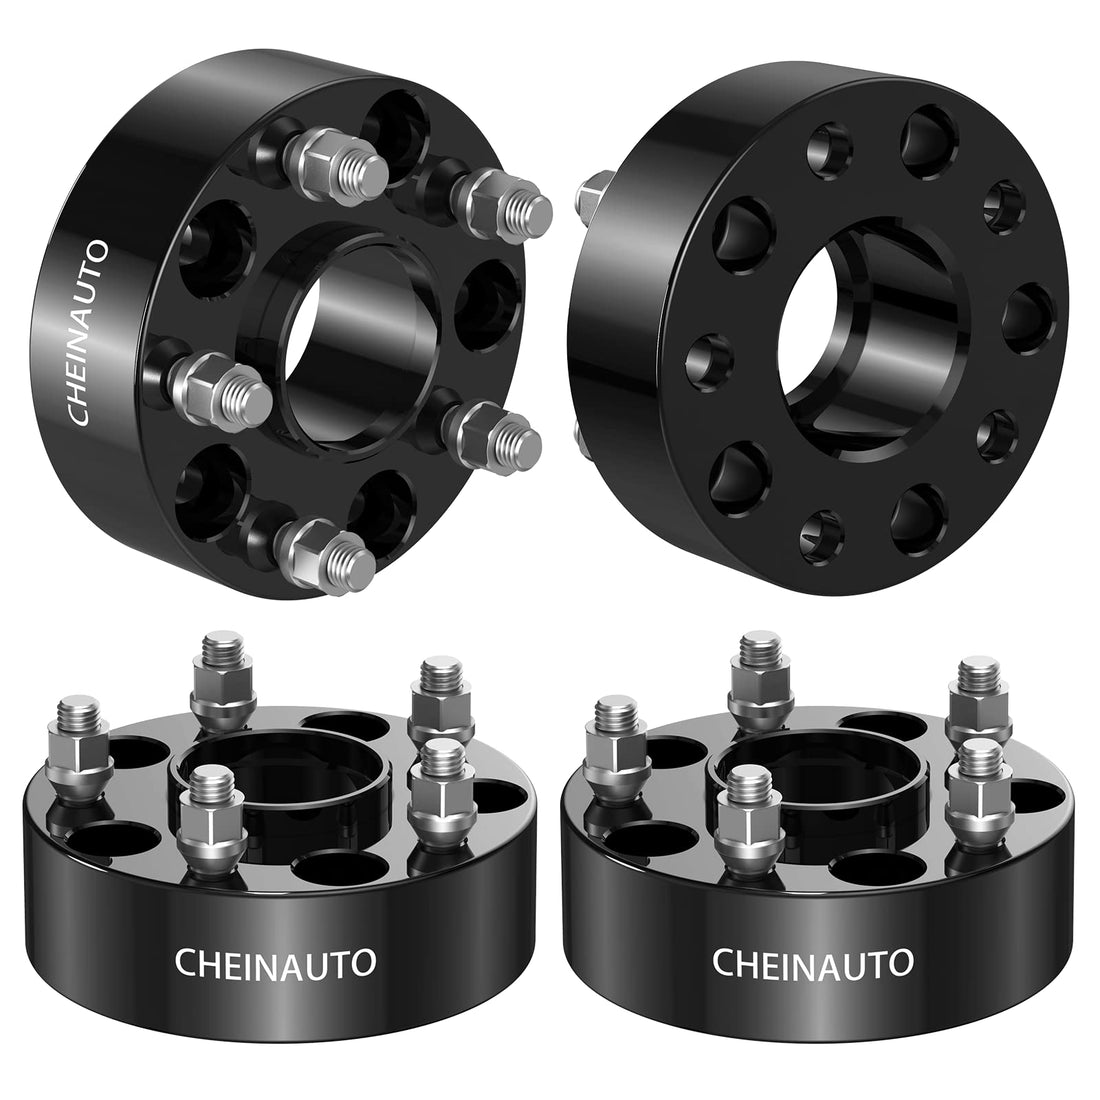 2 Inch Wheel Spacers for Tacoma/Tundra, M12x1.5, Hub-Centric